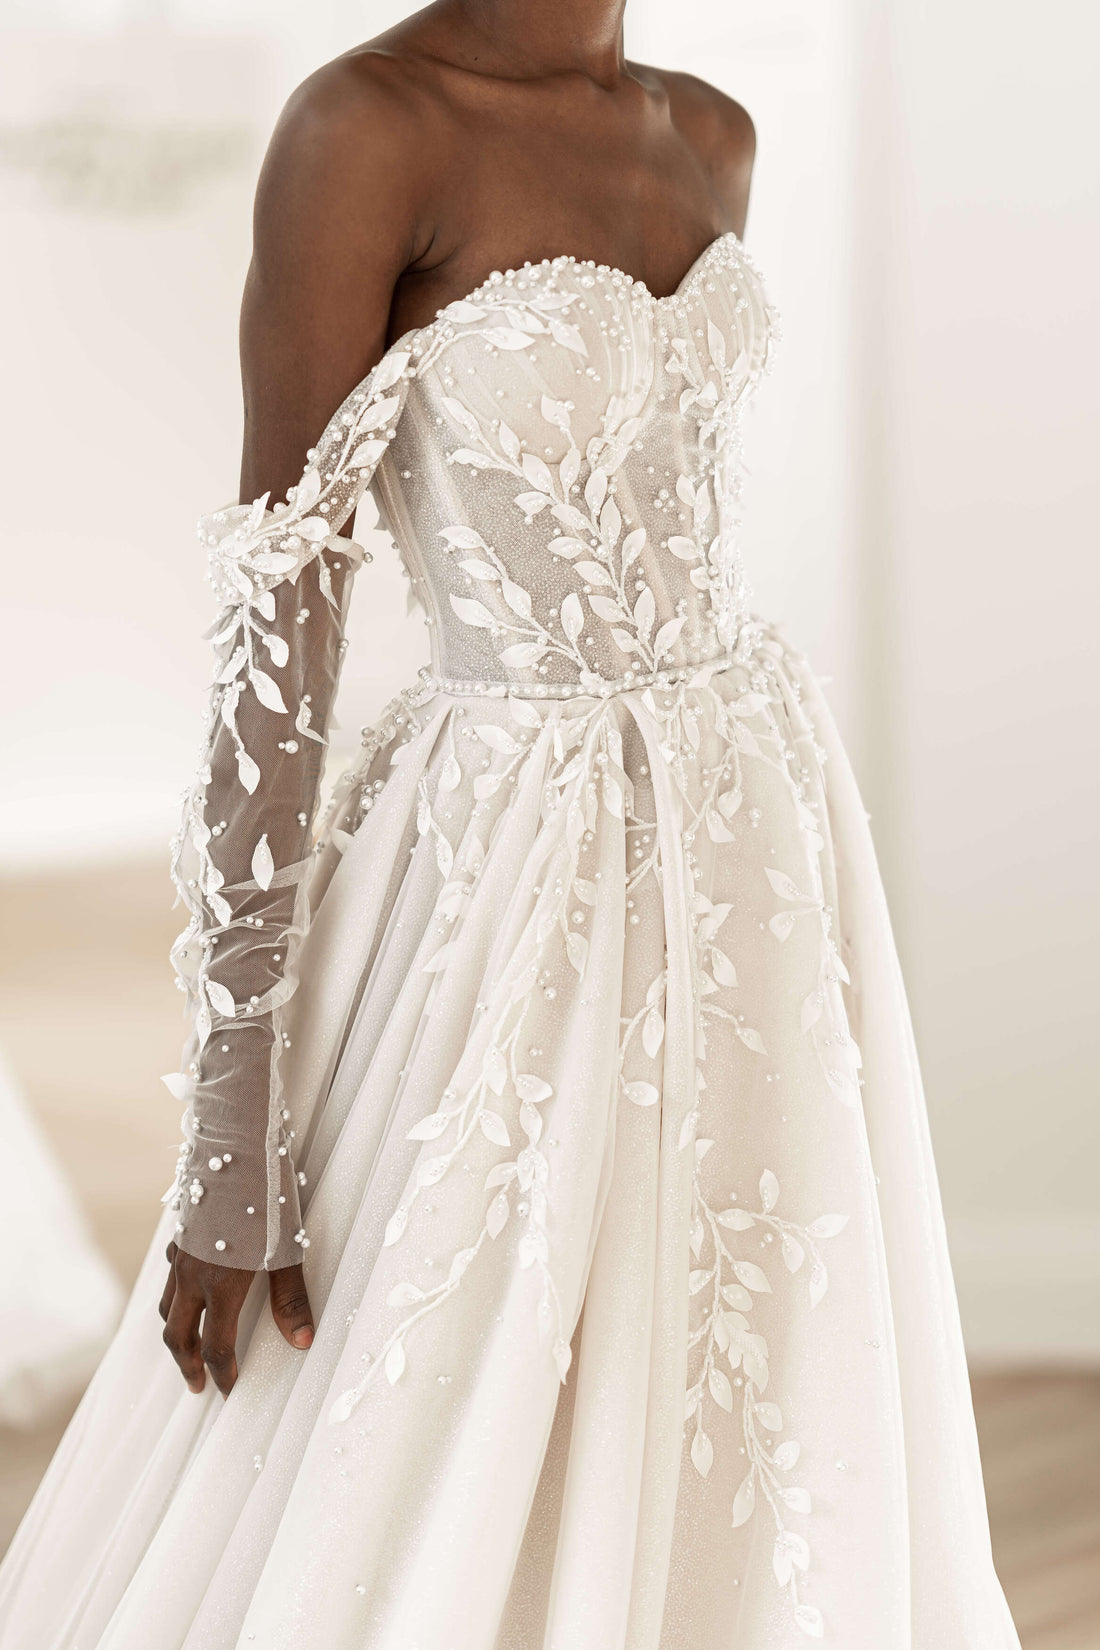  Top Bridal Brand with 10+ Years of Experience - Barcelona Bridal Fashion Week Participant